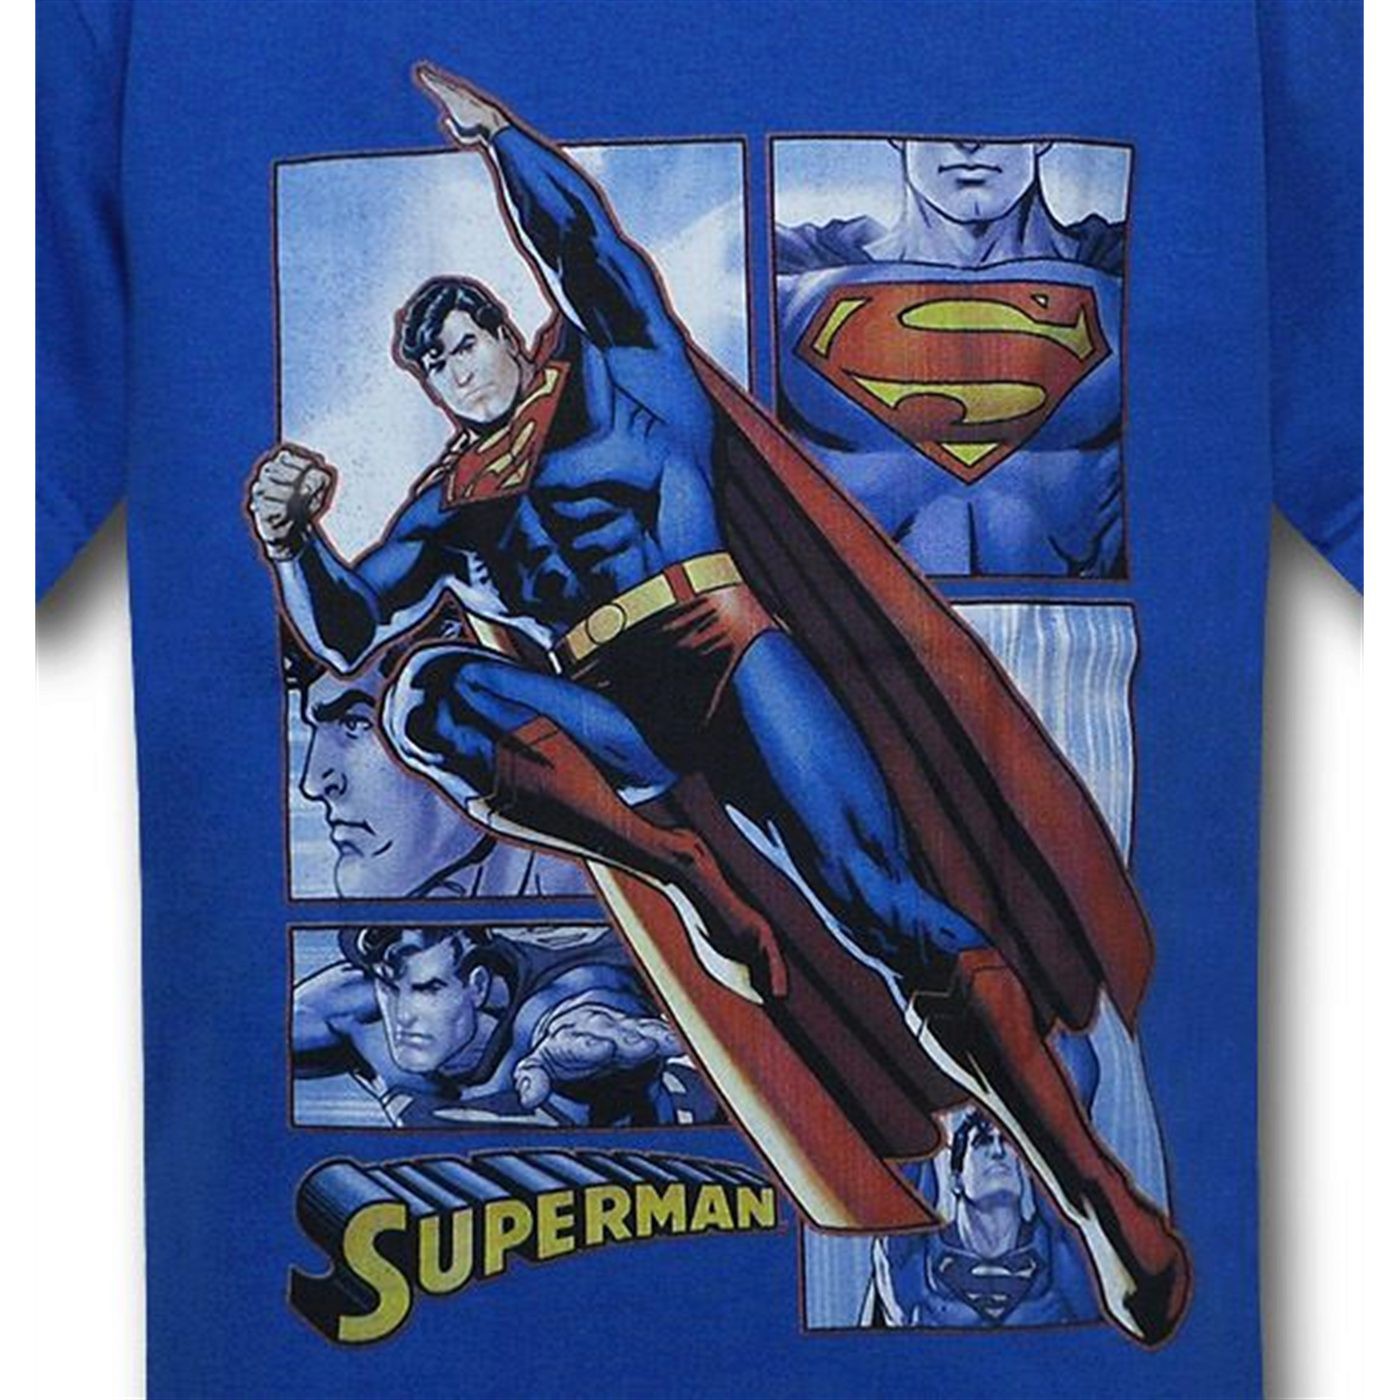 Superman Kids Over Boxes T-Shirt